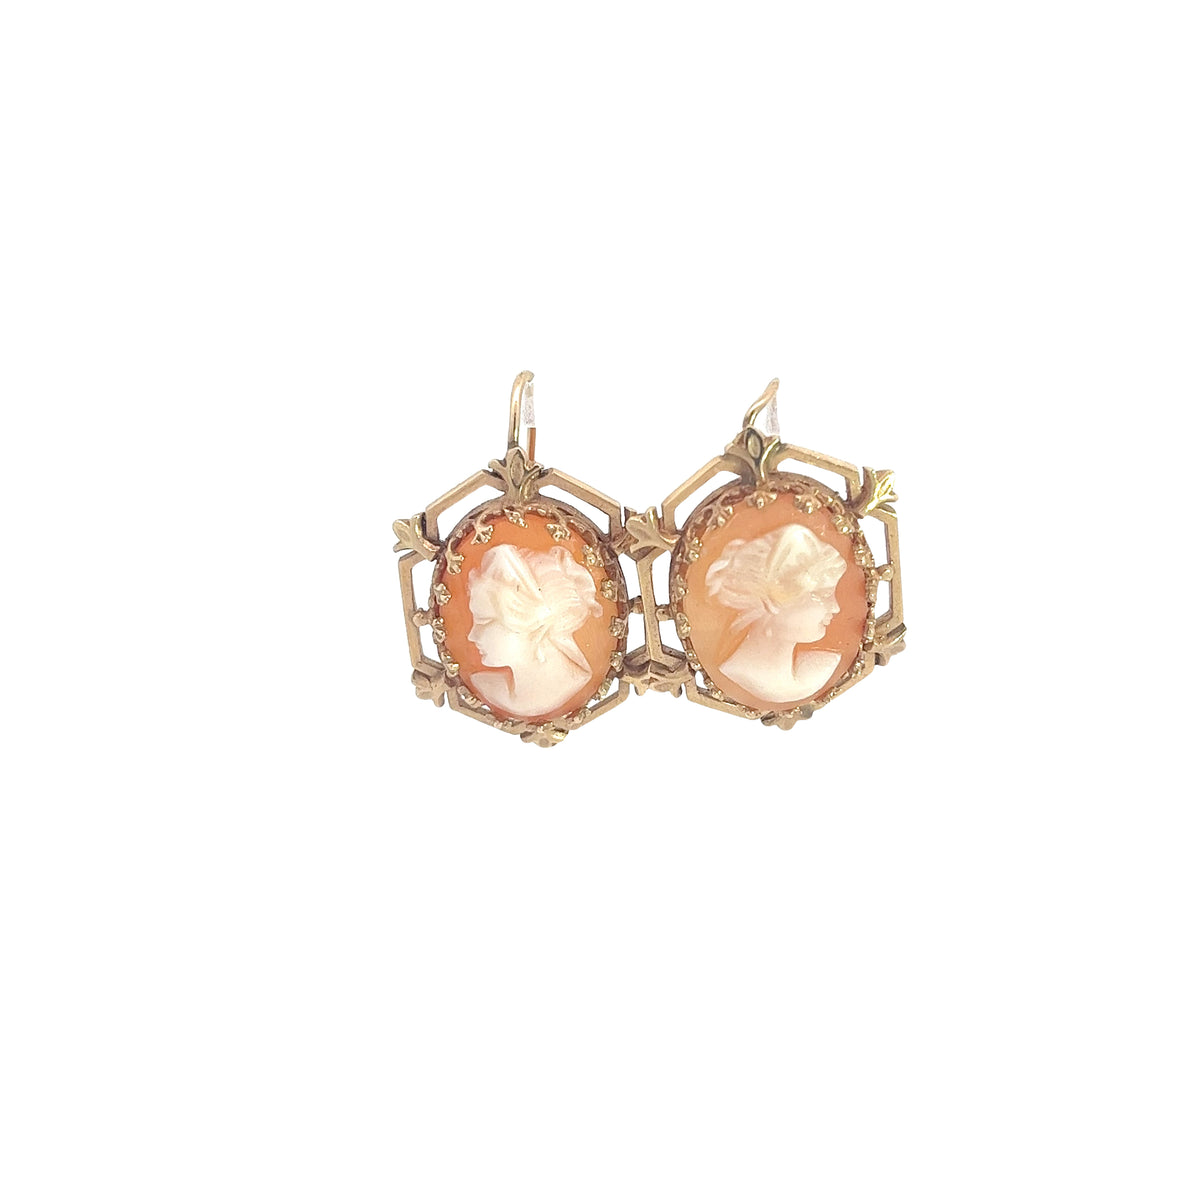 14k yellow gold earrings vintage cameo